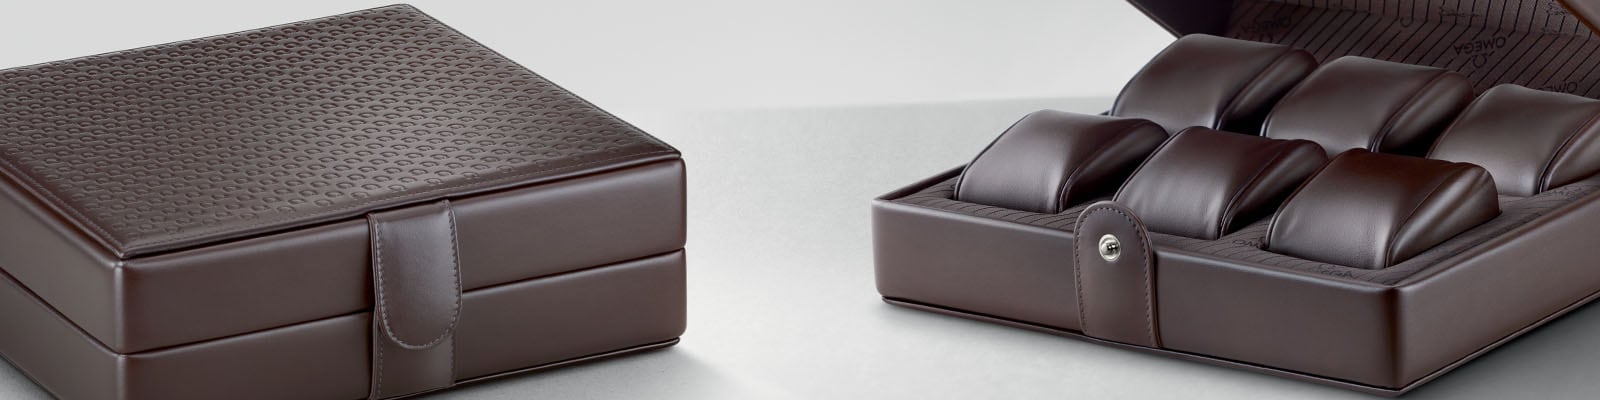 All Leather Watch Boxes | OMEGA®